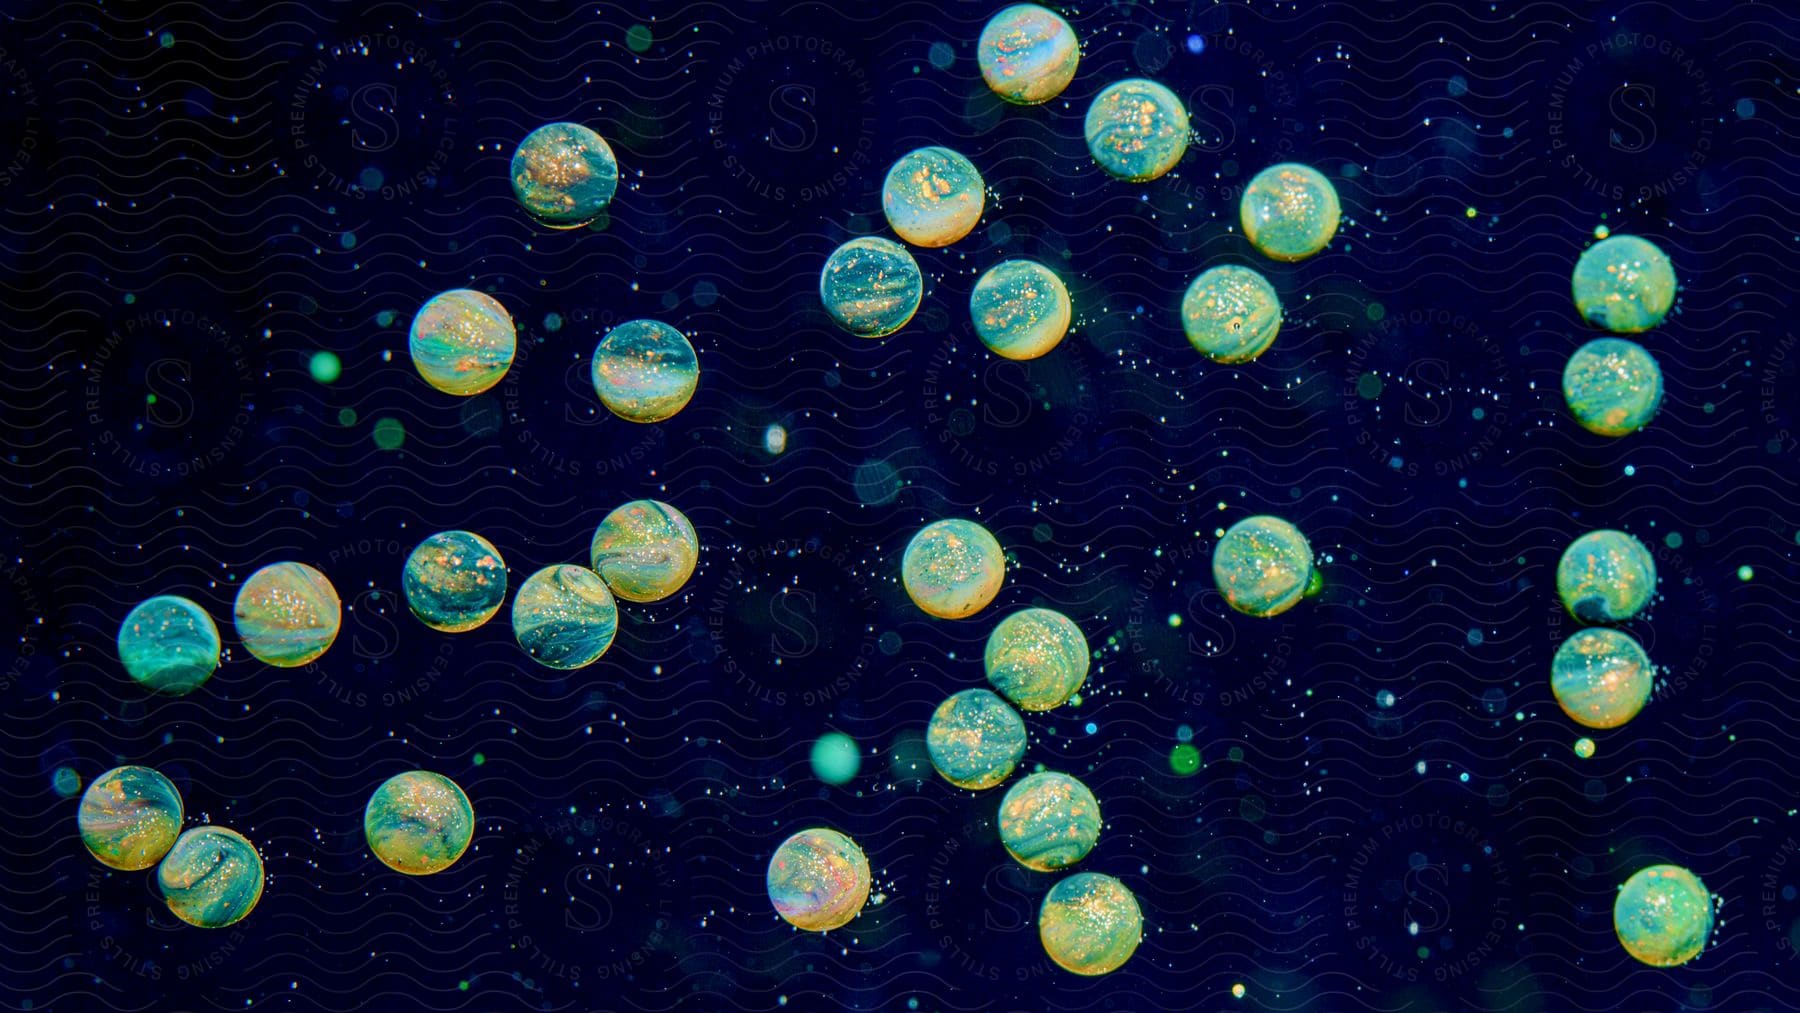 A multicolored artwork depicting planets and stars created with paint in oil